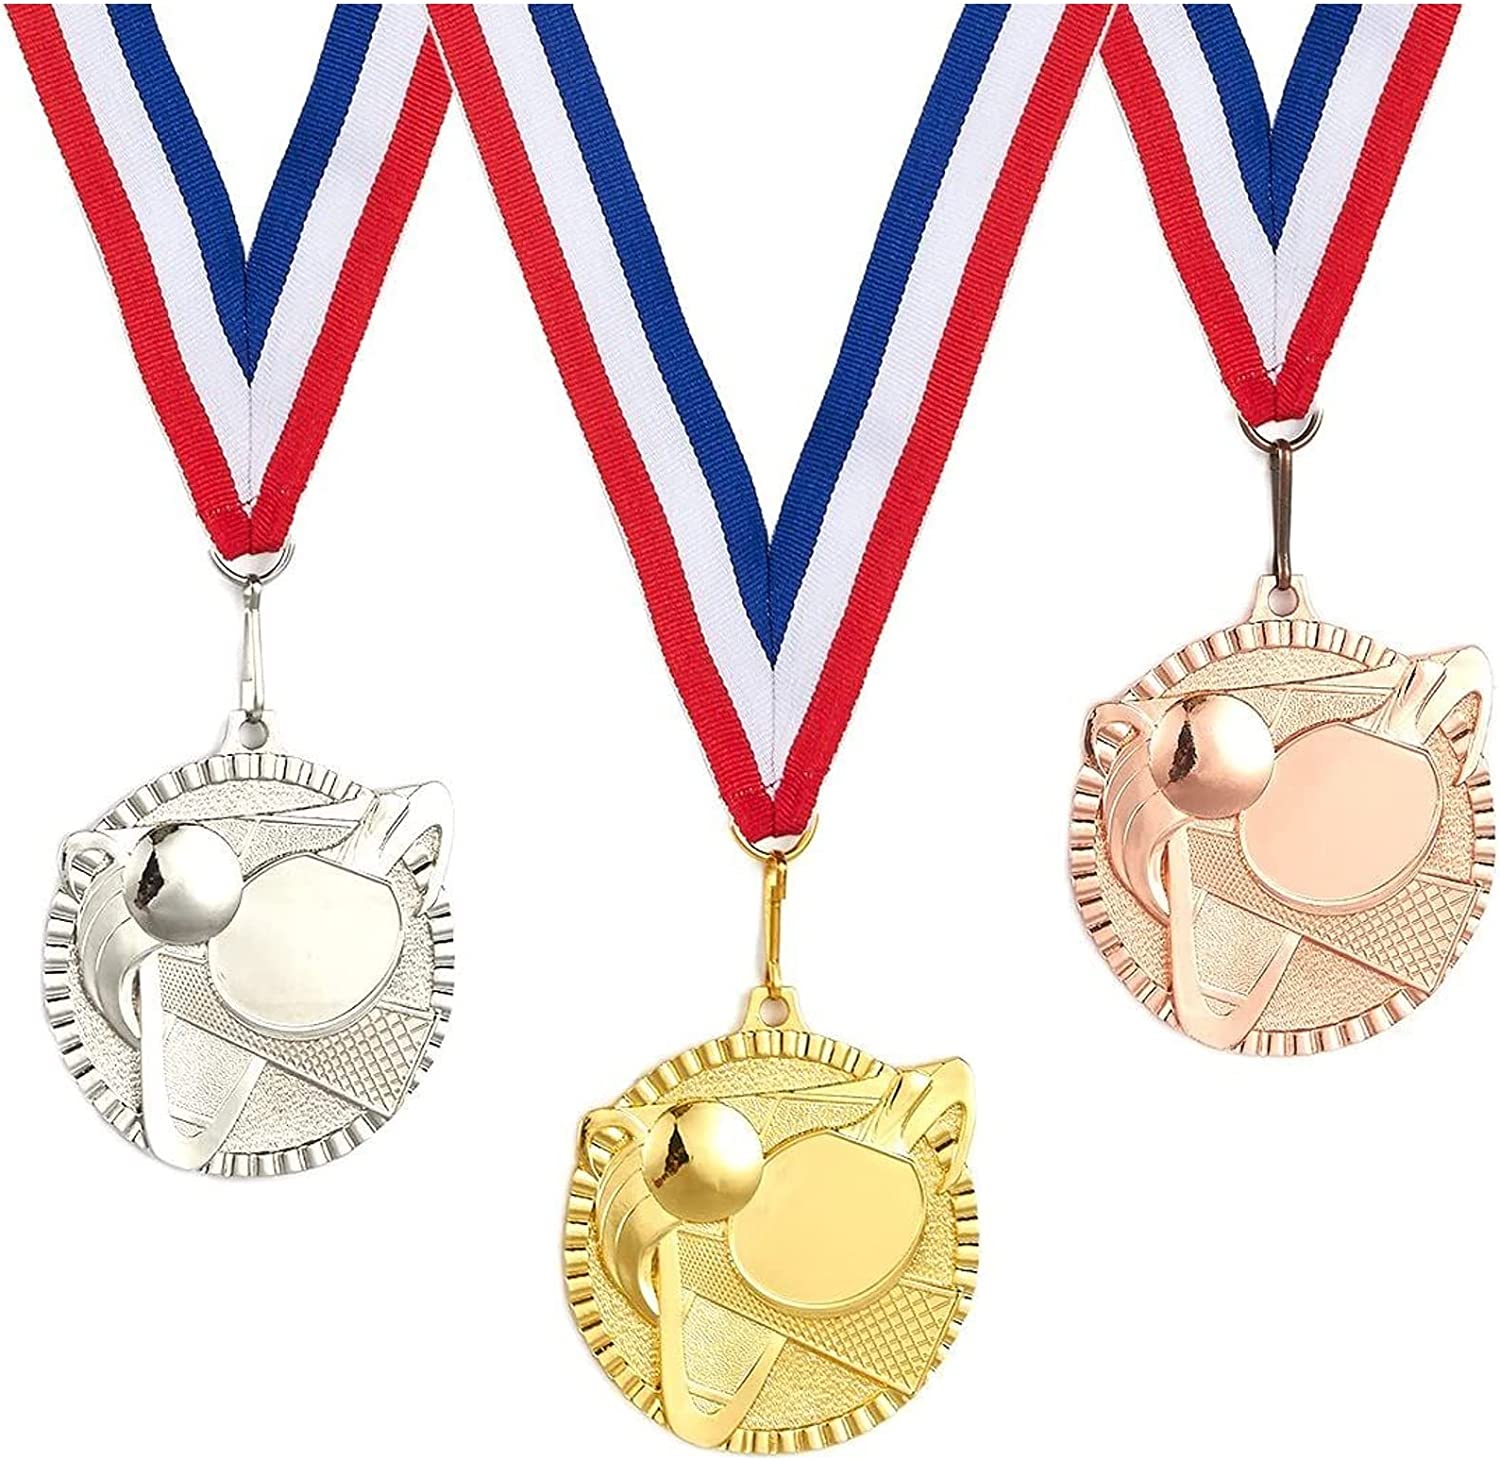 Juvale 3-Piece Award Medals Set, Table Tennis Gold, Silver, Bronze Medals for Ping Pong Games, Competitions, Party Favors, 2.3 Inches in Diameter with 32-Inch Ribbon